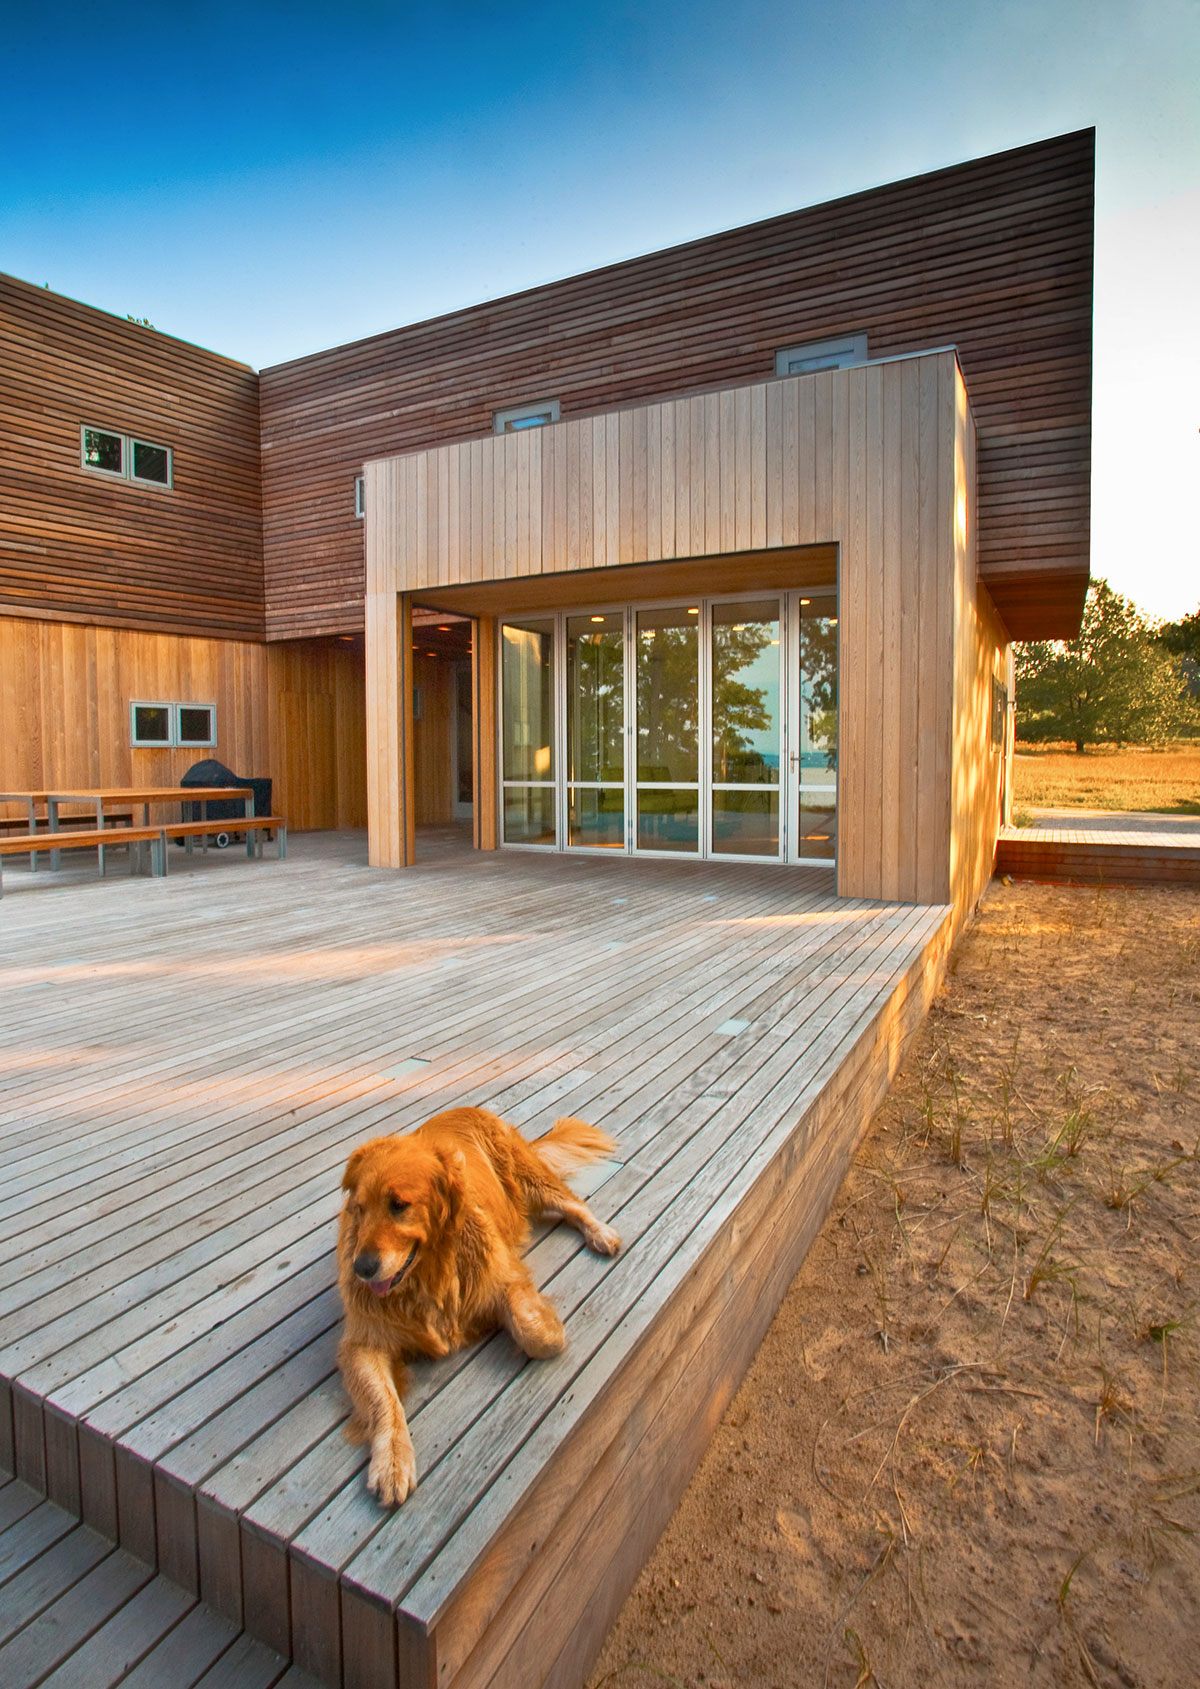 Wooden deck of the sustainable lake house project in Omena, Michigan designed by the architecture studio Danny Forster & Architecture